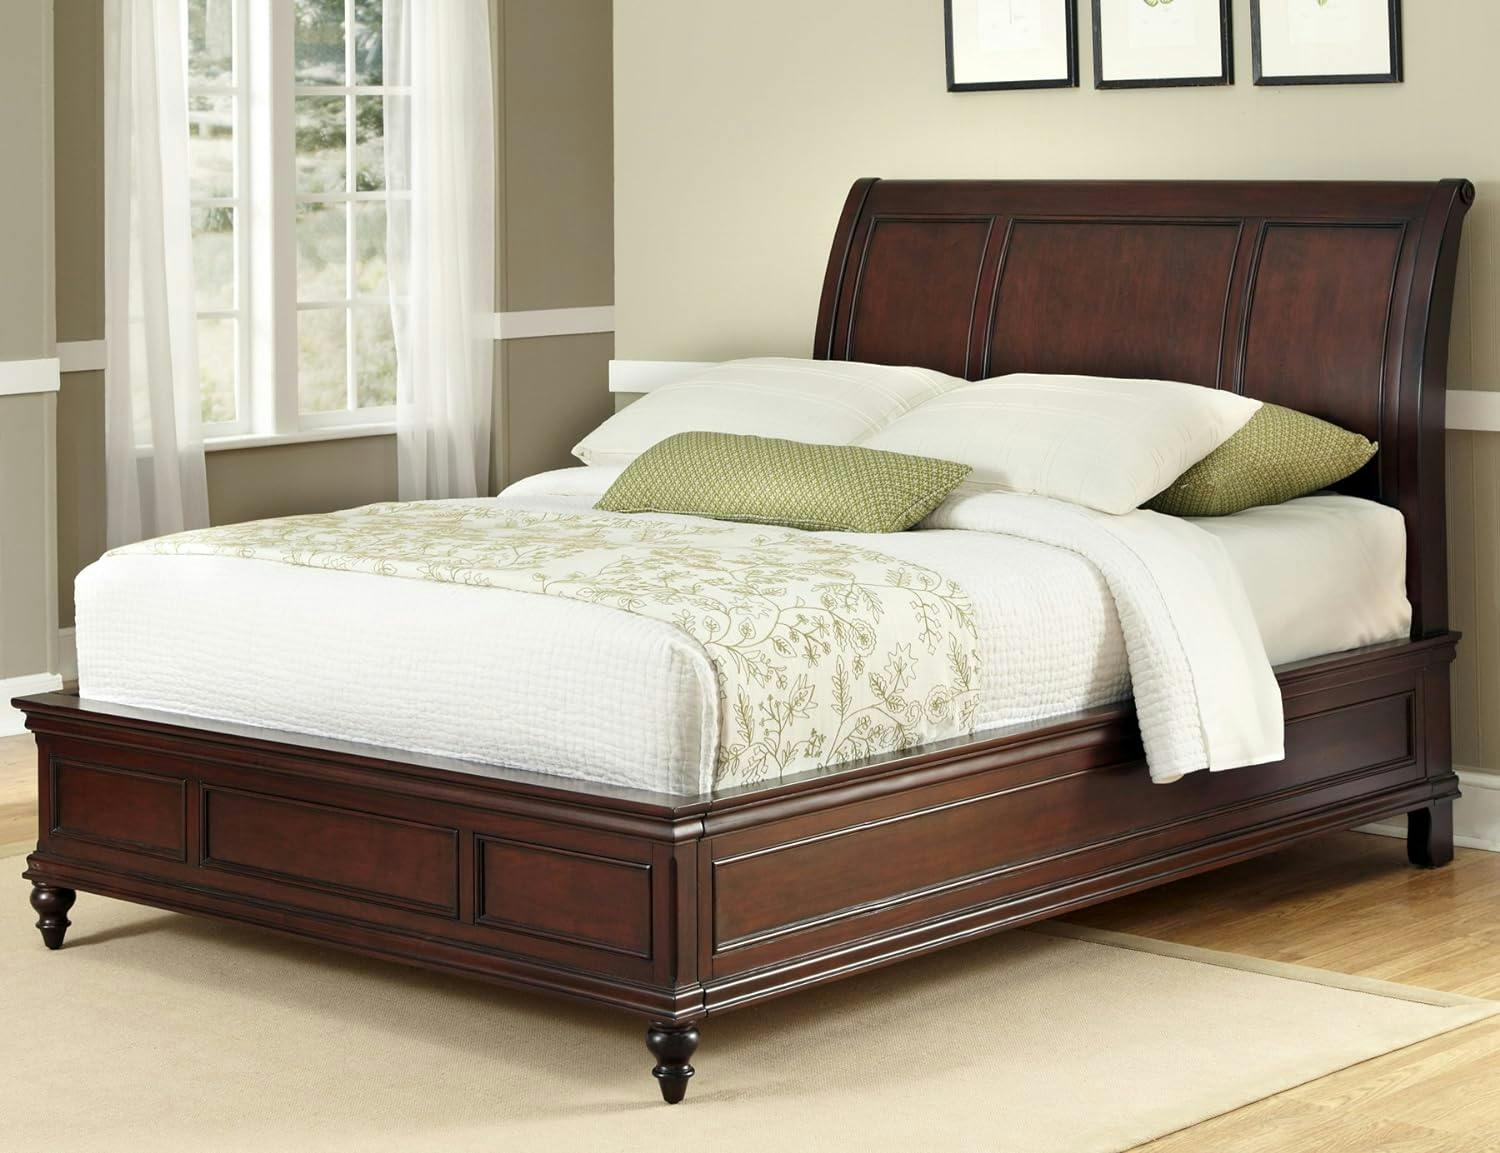 Lafayette Elegance King Sleigh Bed with Storage Drawers in Cherry Mahogany